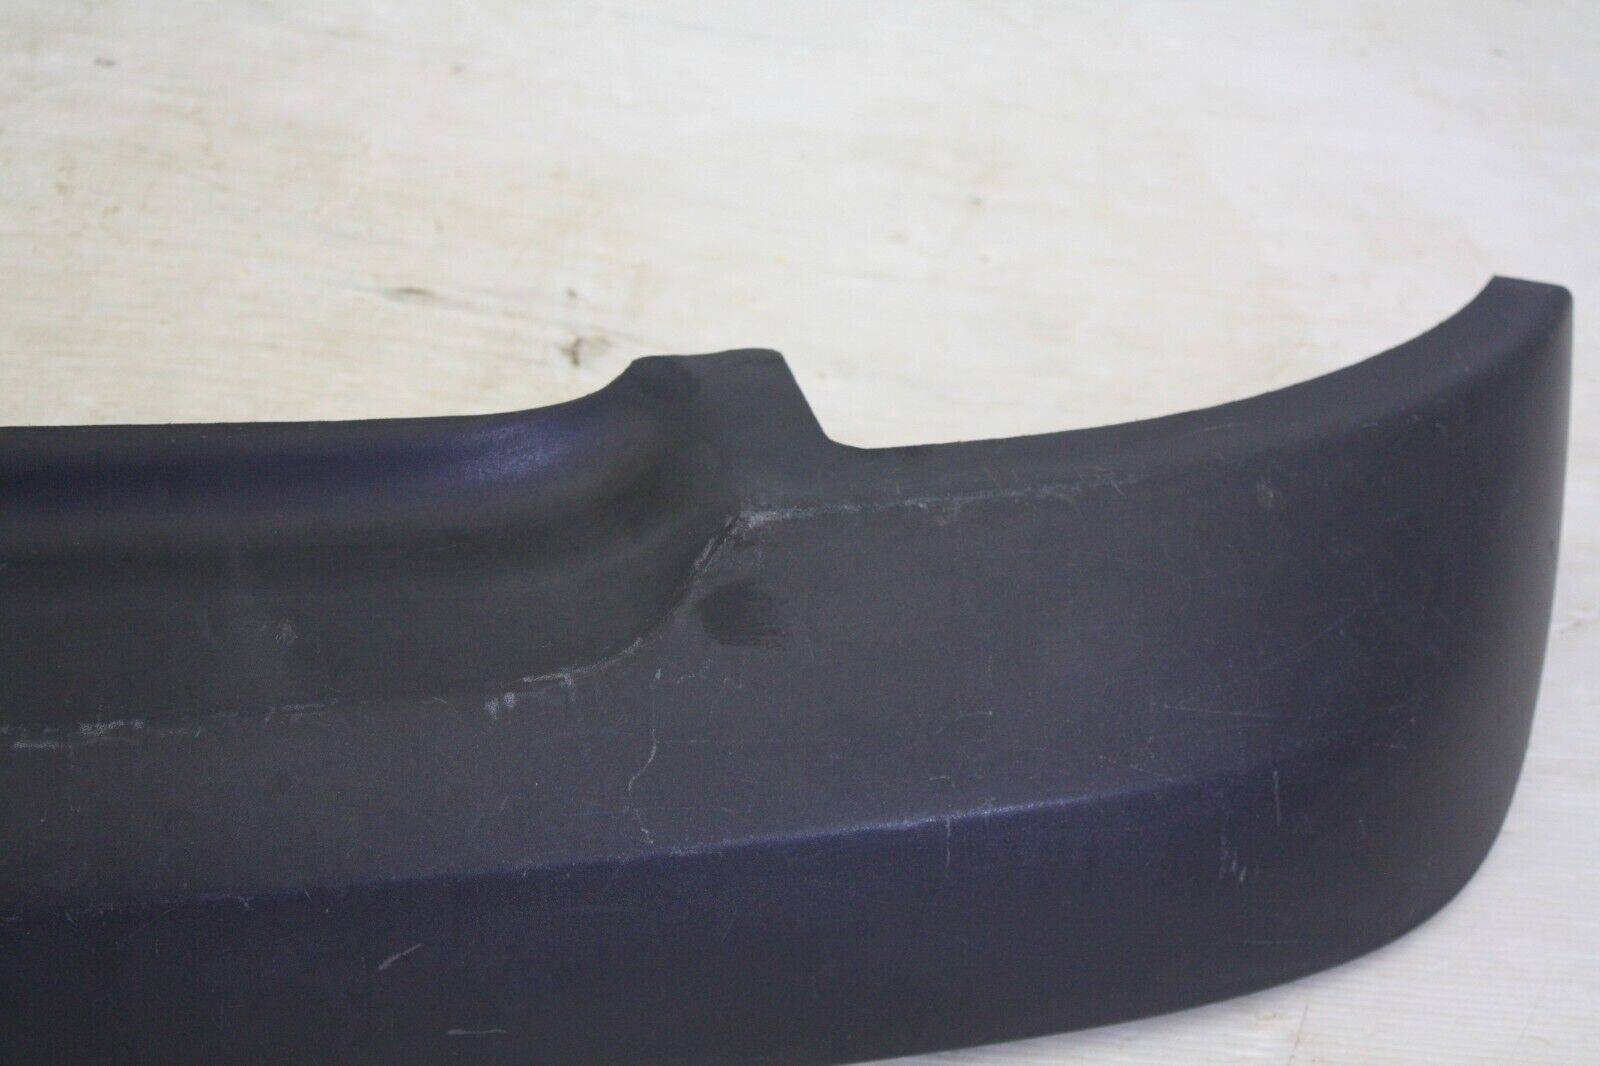 Renault-Clio-Rear-Bumper-Upper-Section-2001-TO-2005-8200083217-Genuine-176093485781-12